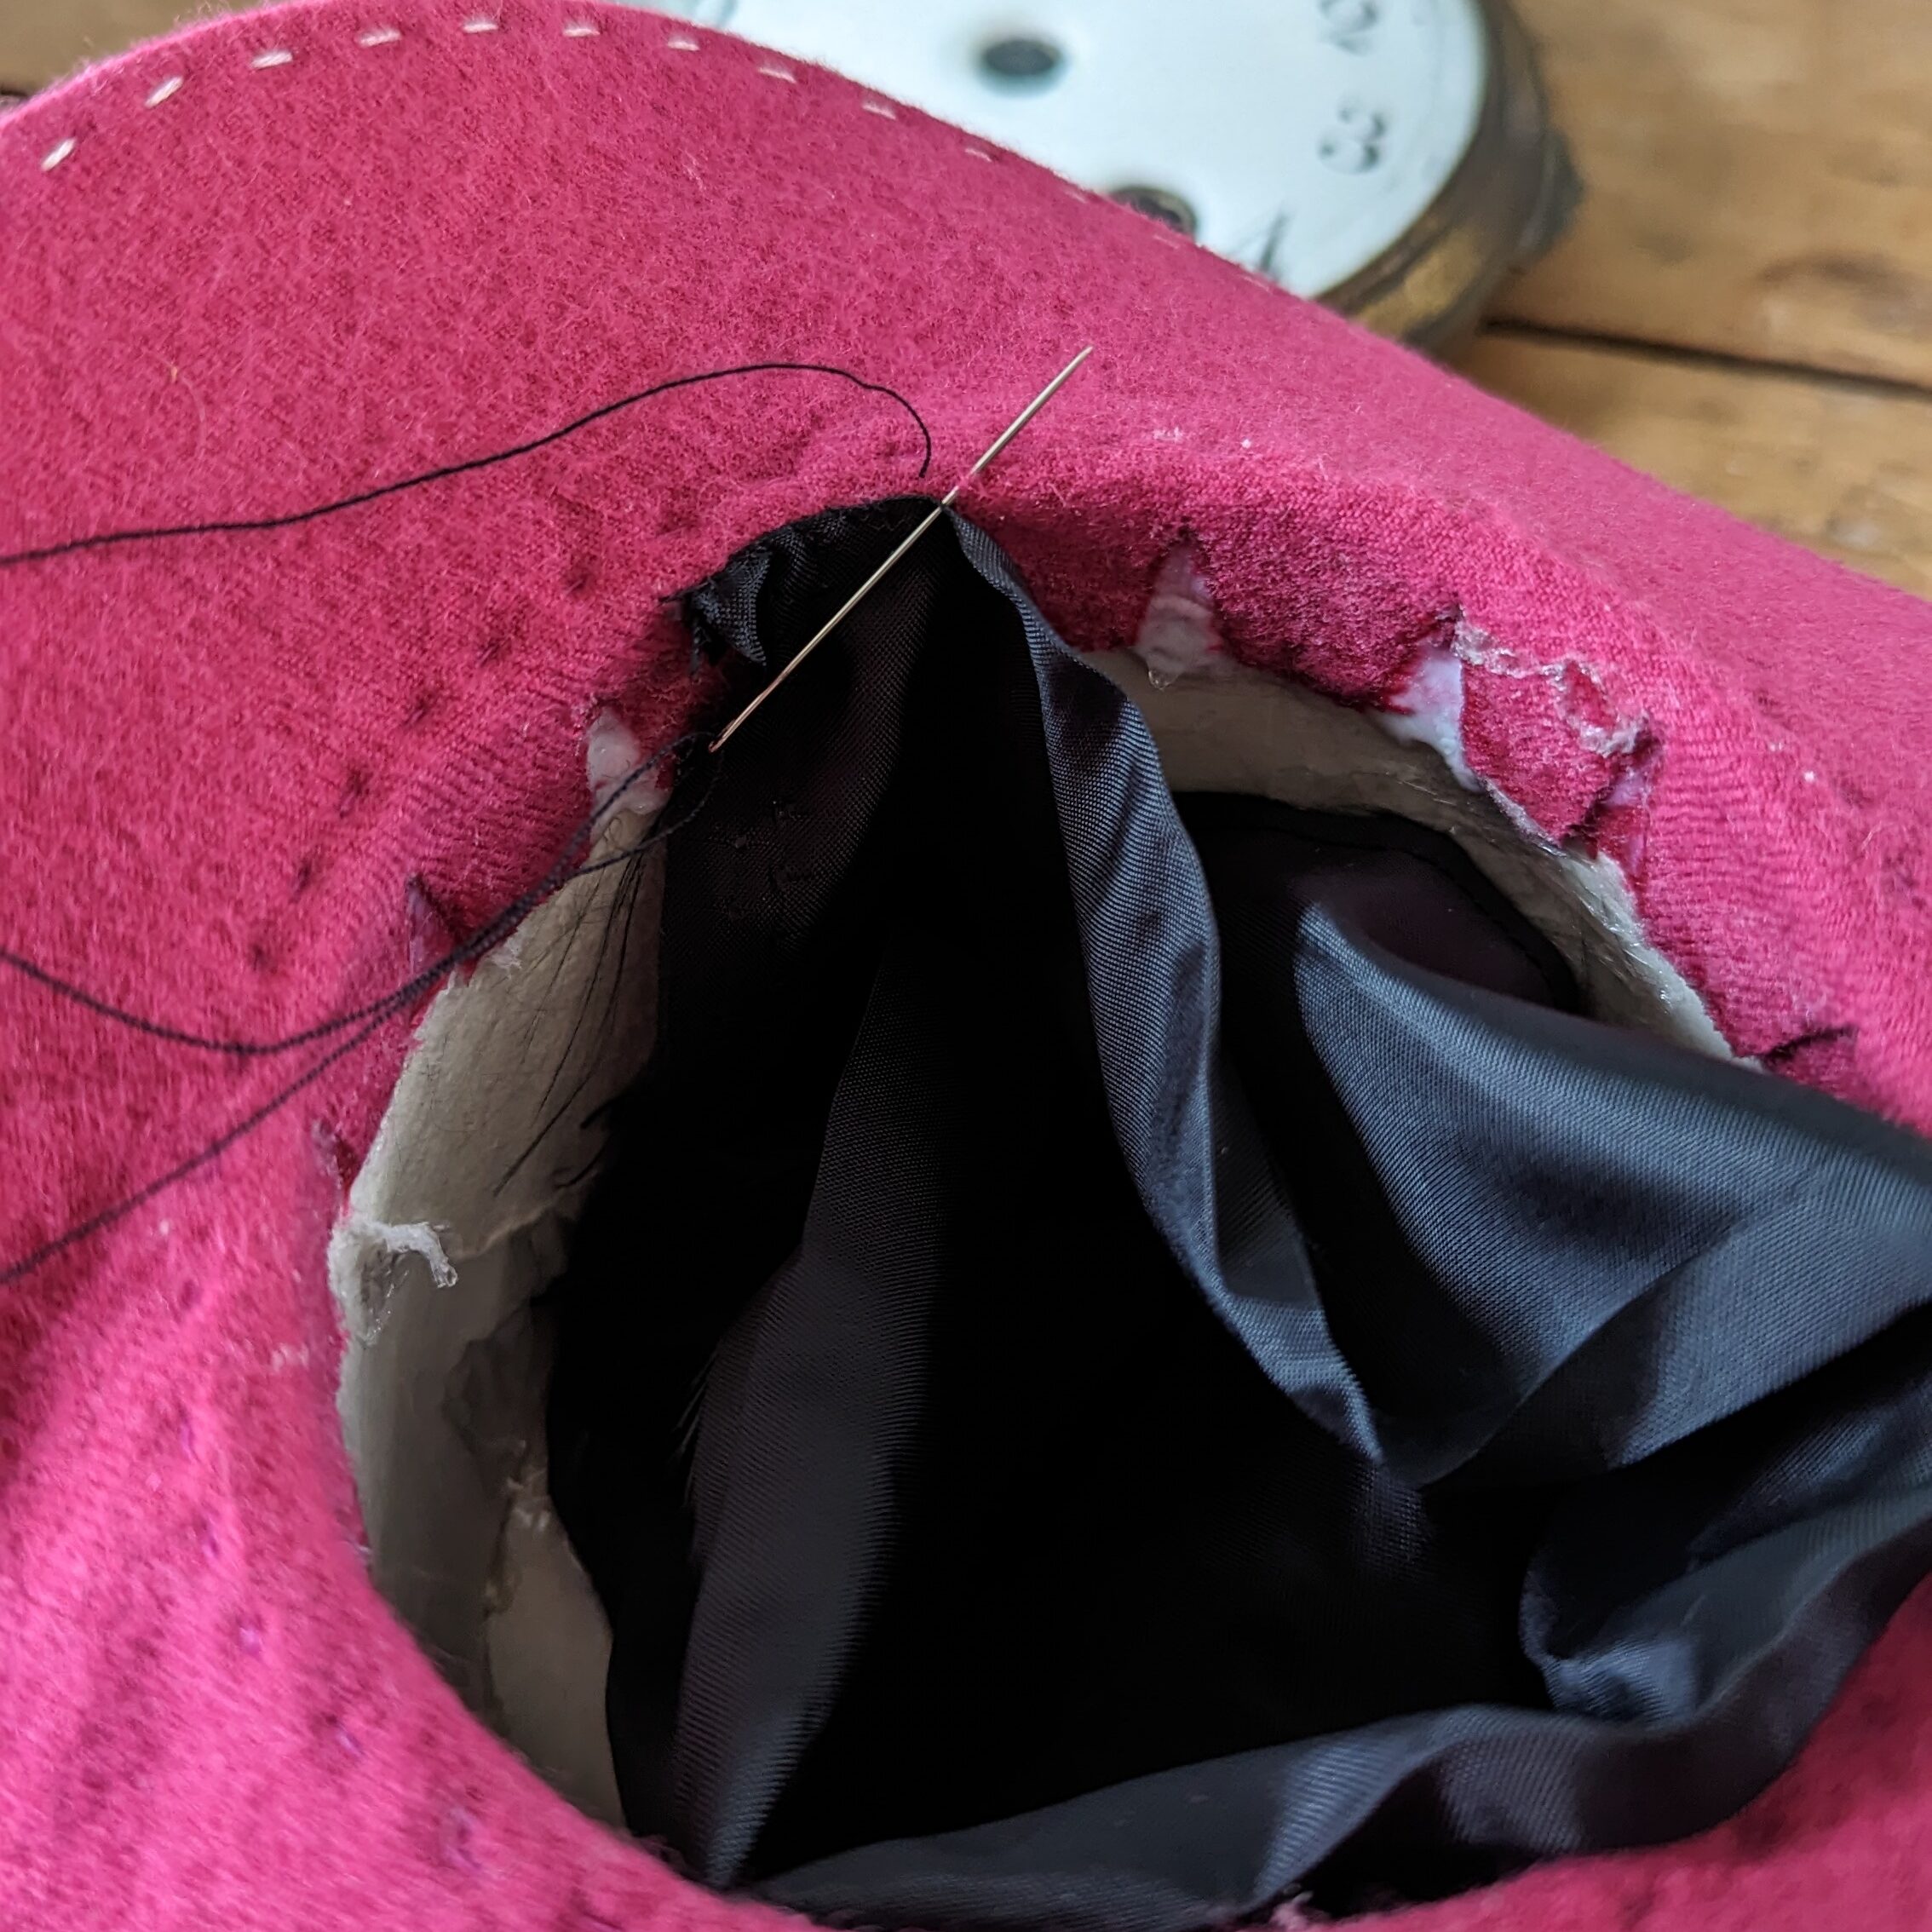 wip of a top hat for art dolls